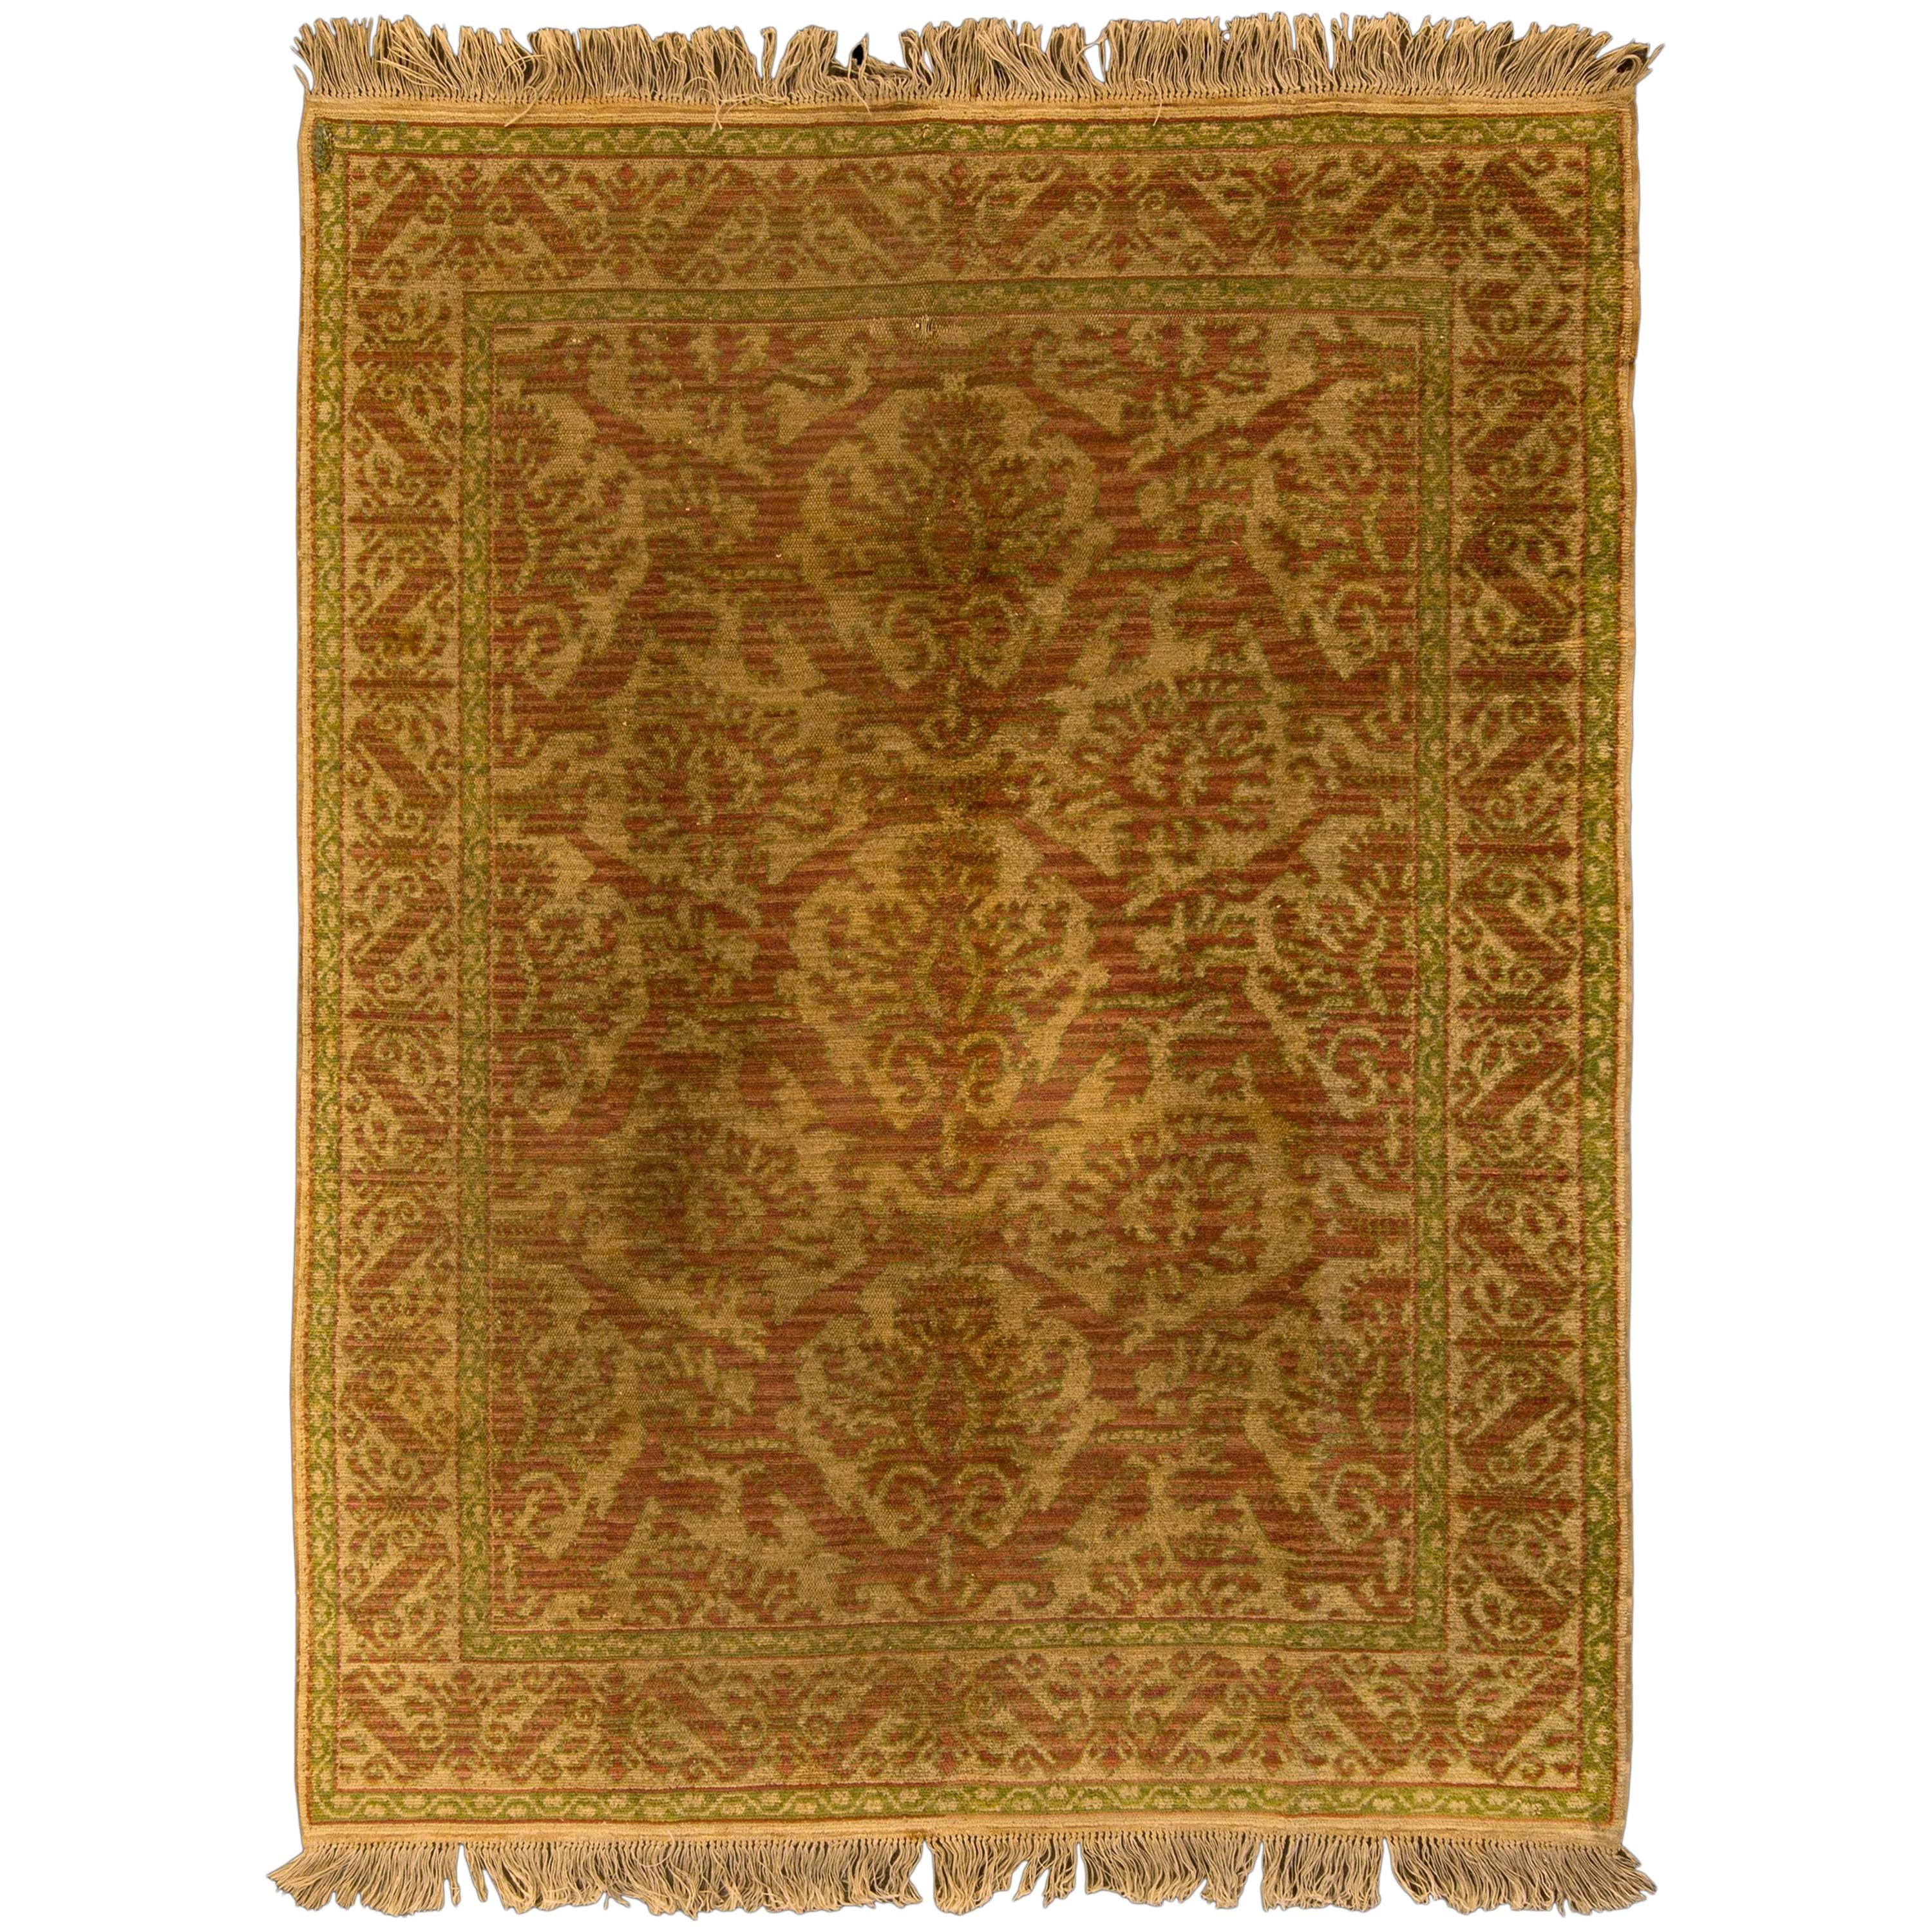 Mid 20th Century Hand-knotted Wool Spanish Cuenca Rug For Sale